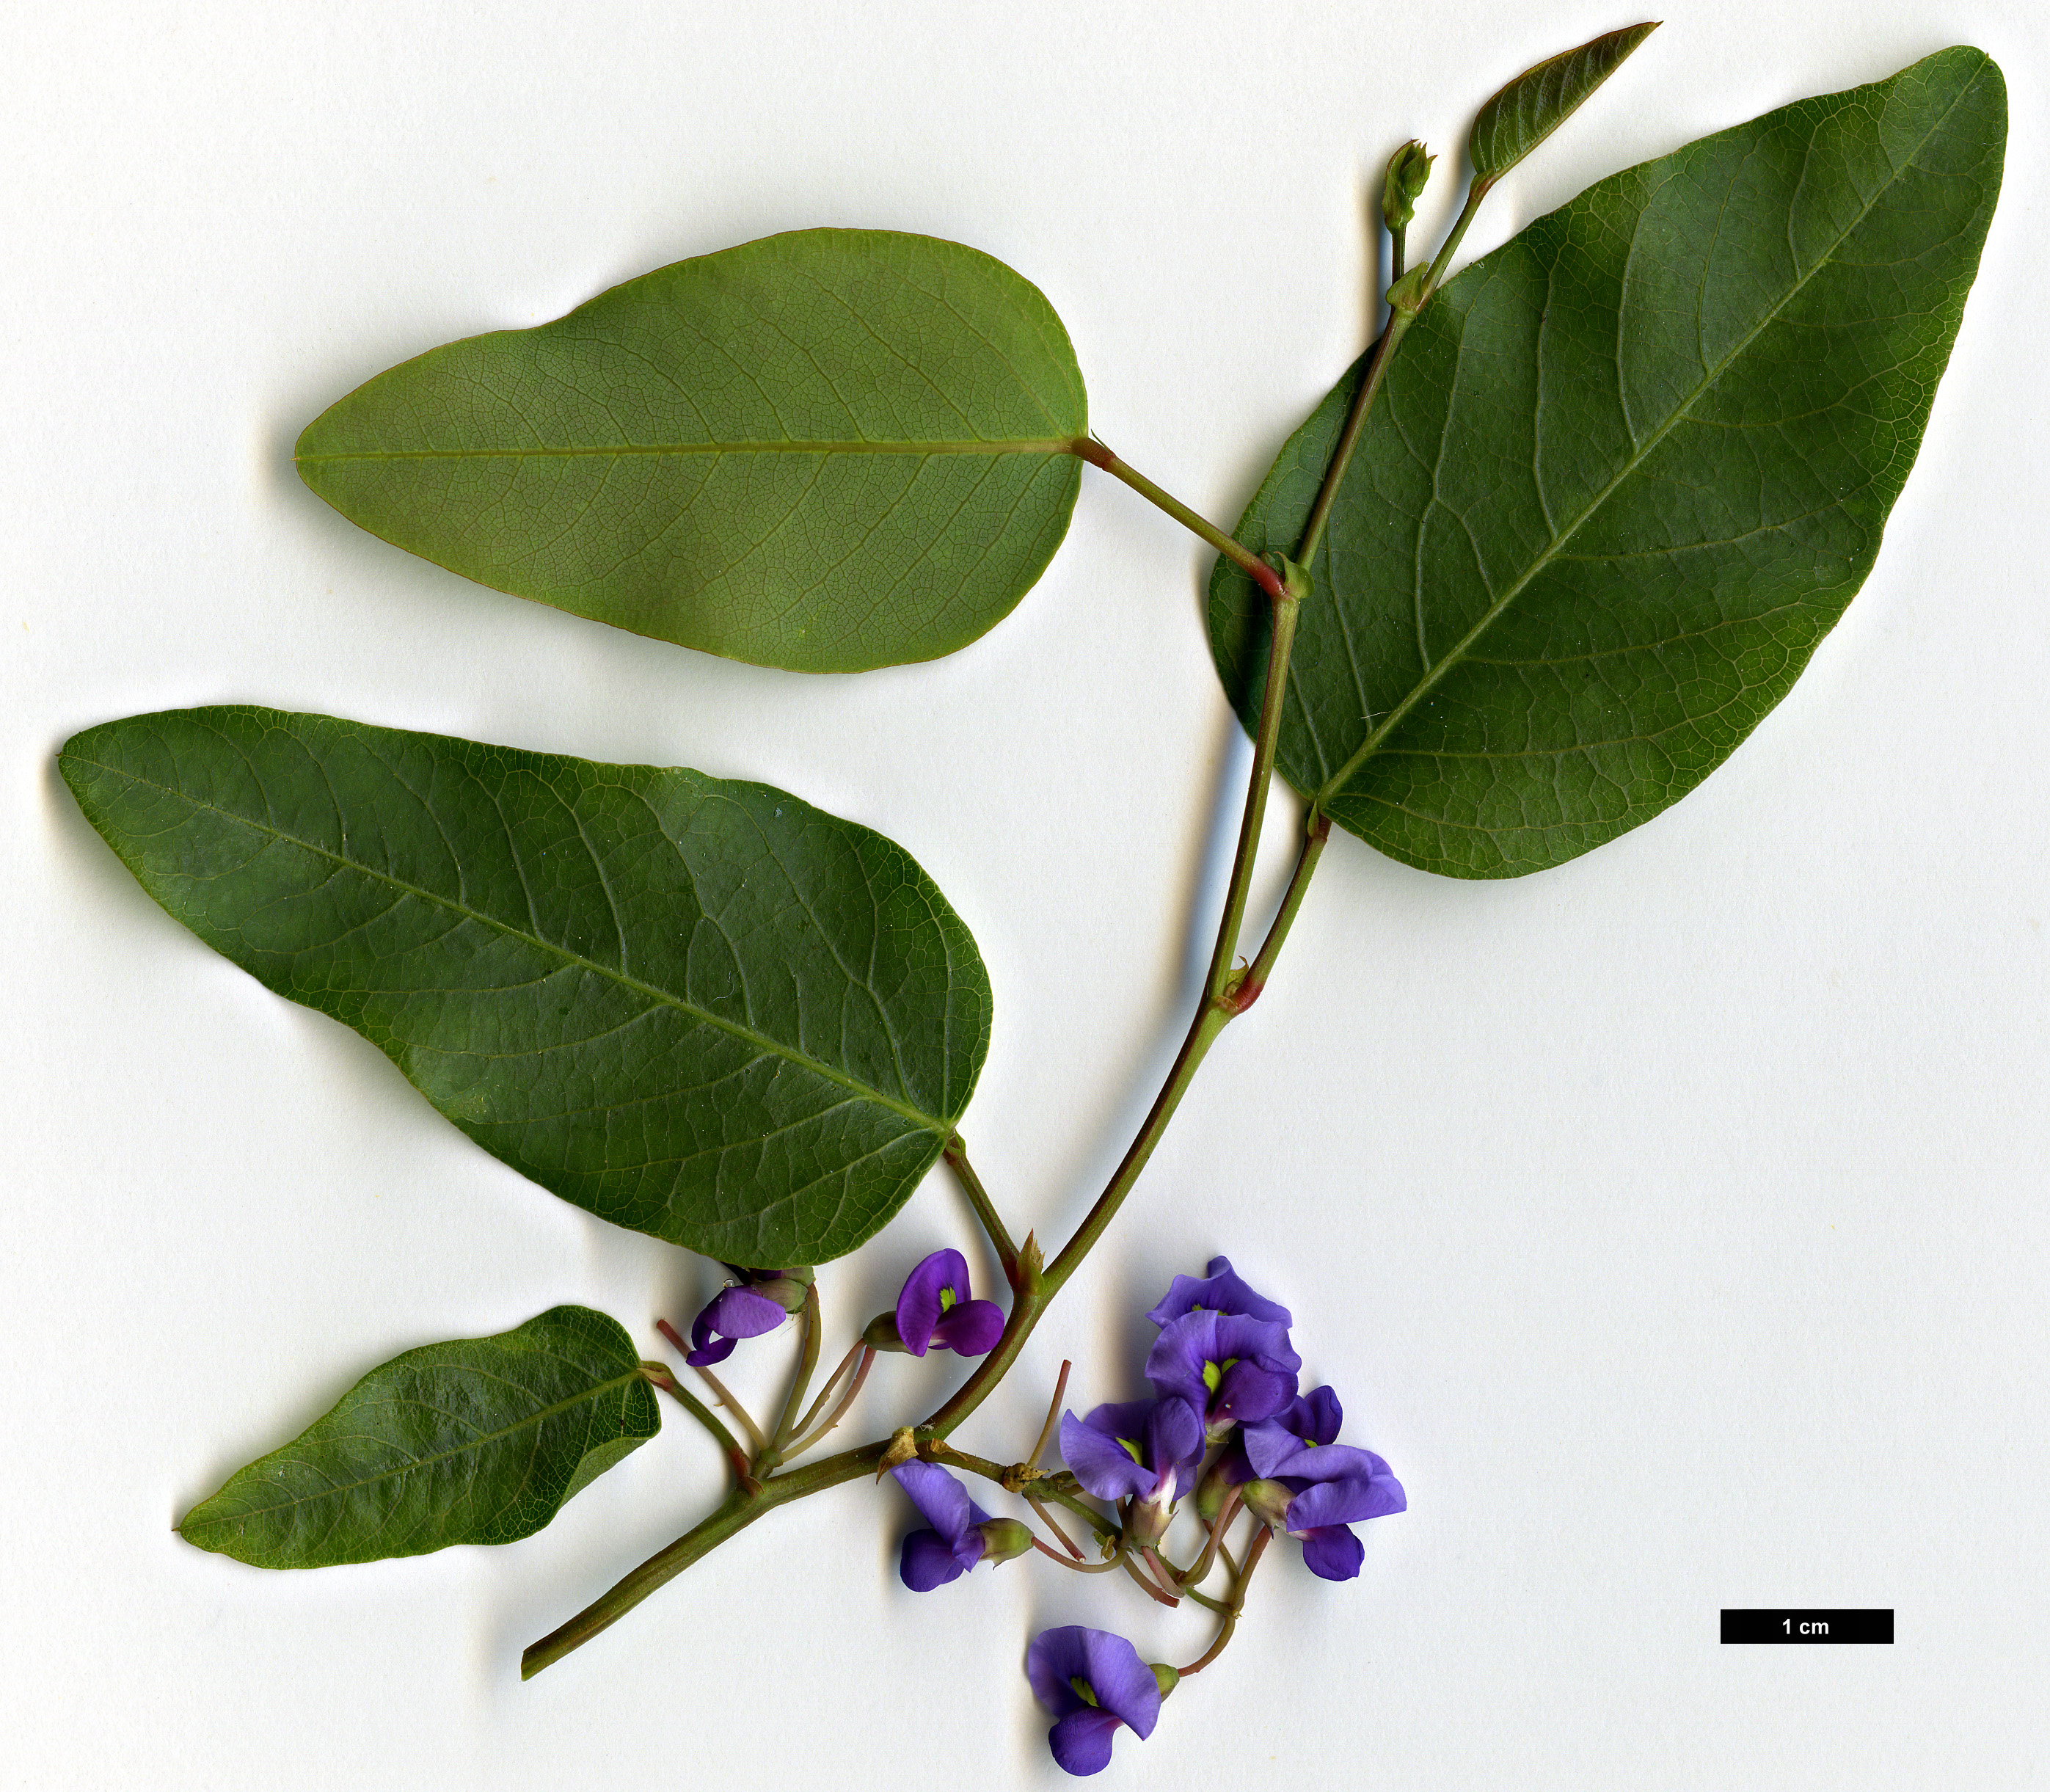 High resolution image: Family: Fabaceae - Genus: Hardenbergia - Taxon: violacea